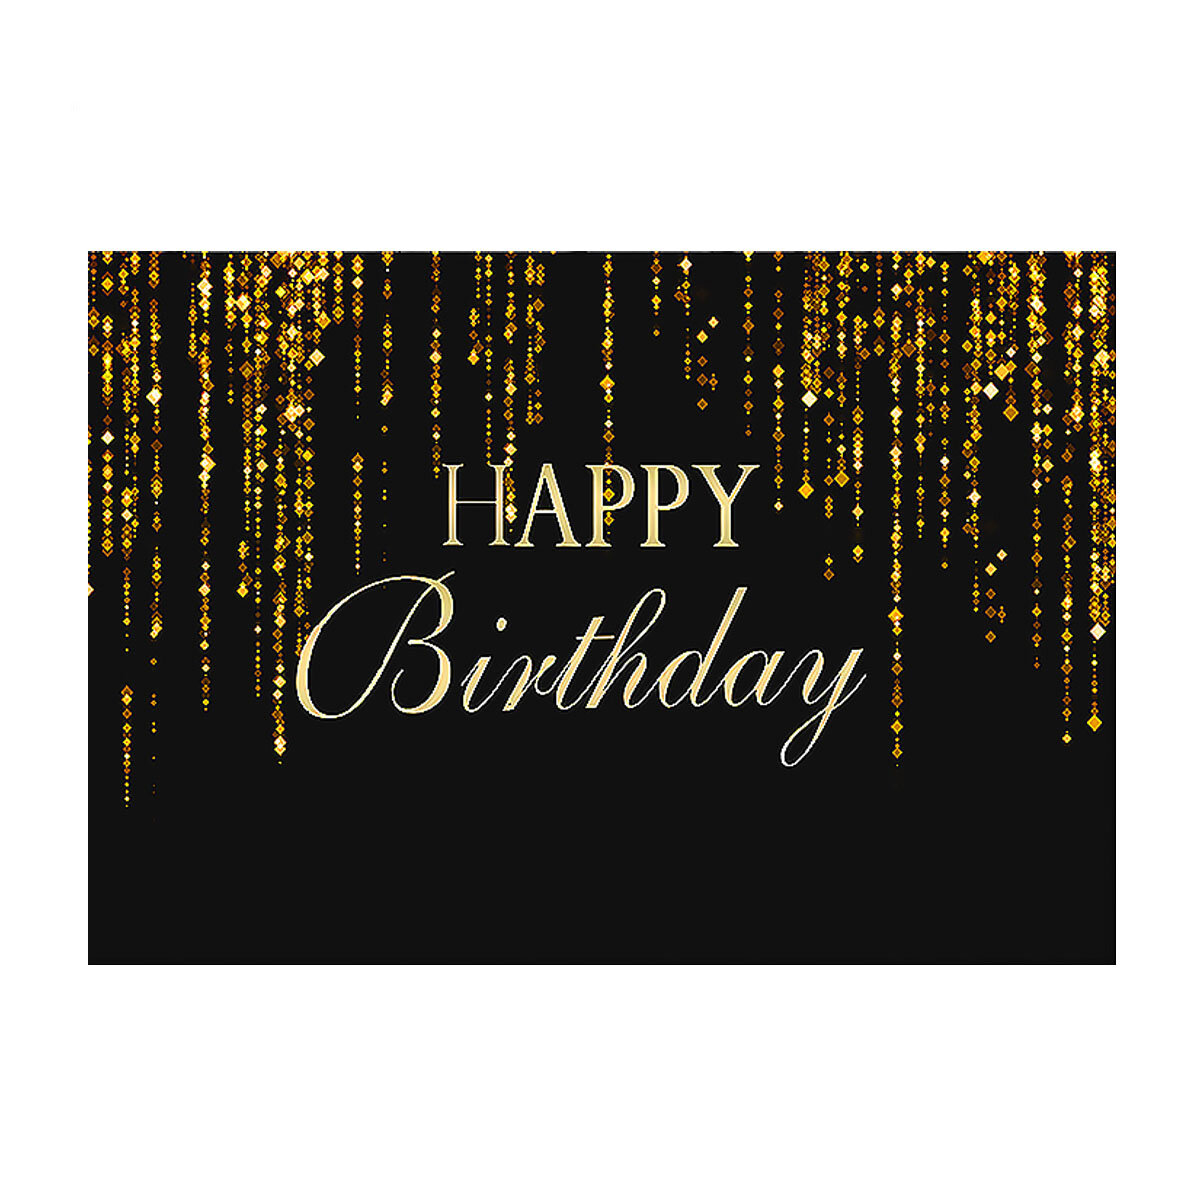 Happy Birthday Photography Backdrops Glitter Sequin Spots Background Cloth for Party Photograph Back